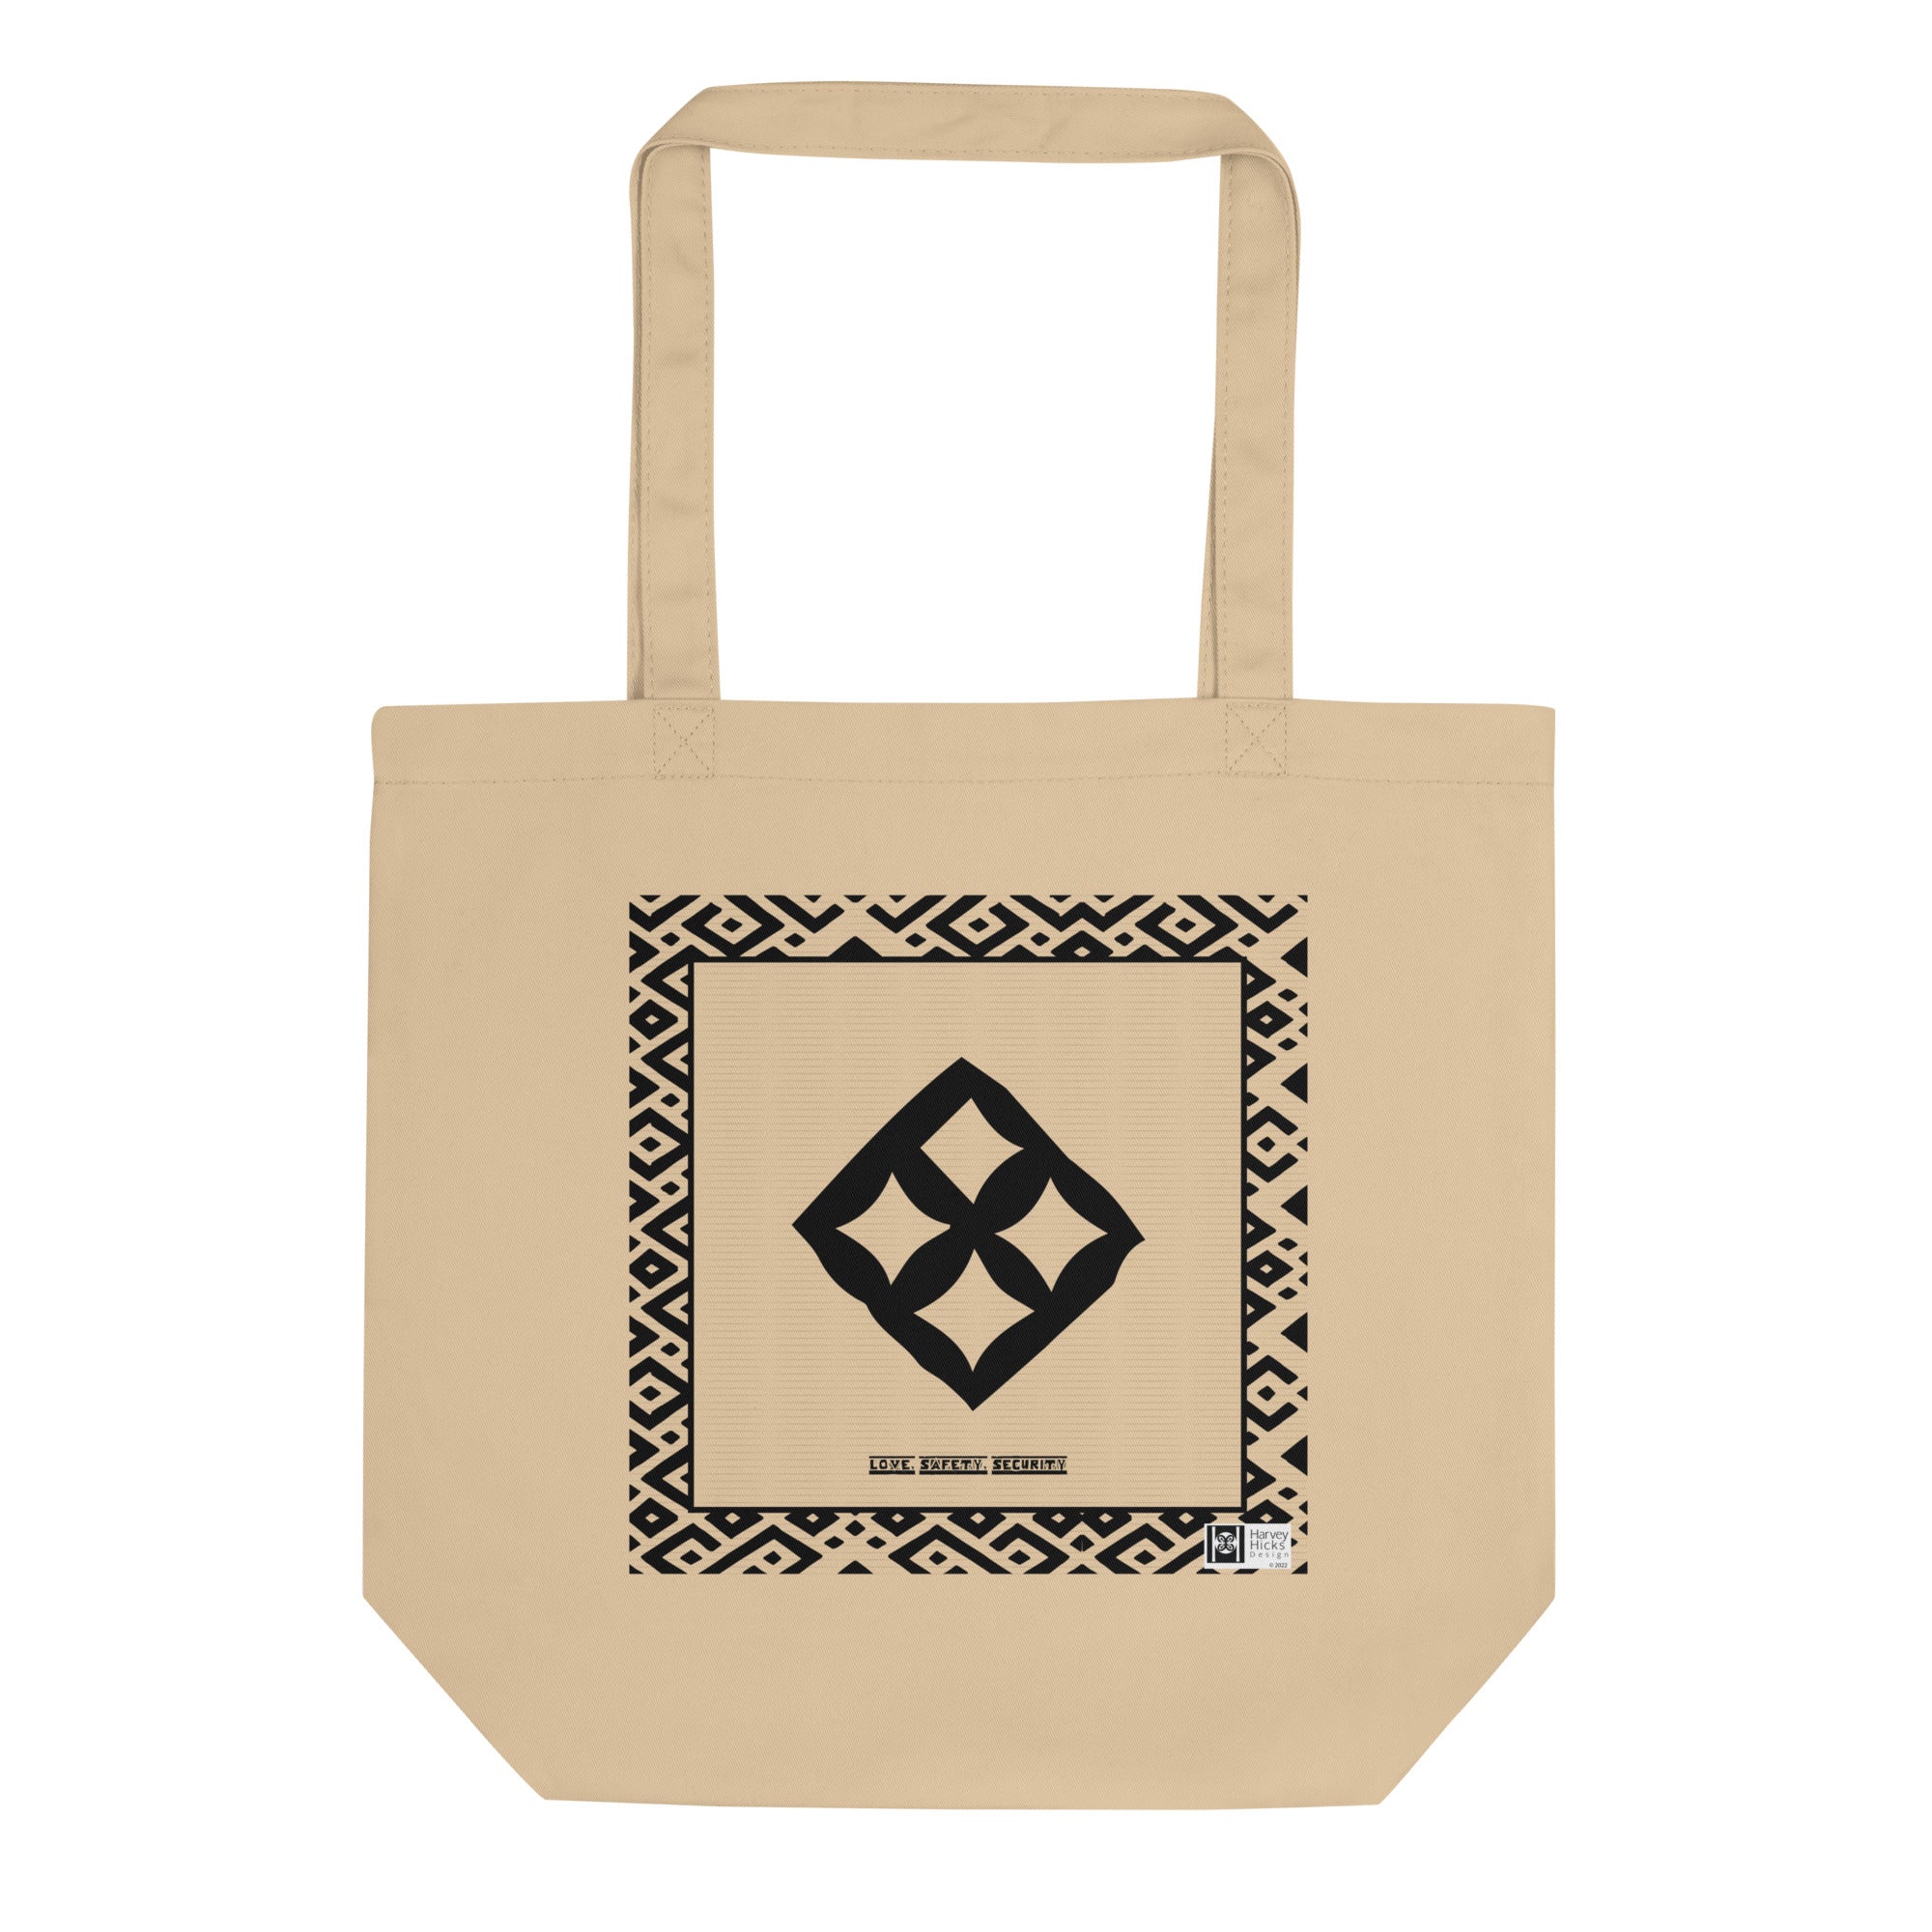 100% cotton Eco Tote Bag, featuring the Adinkra symbol for safety